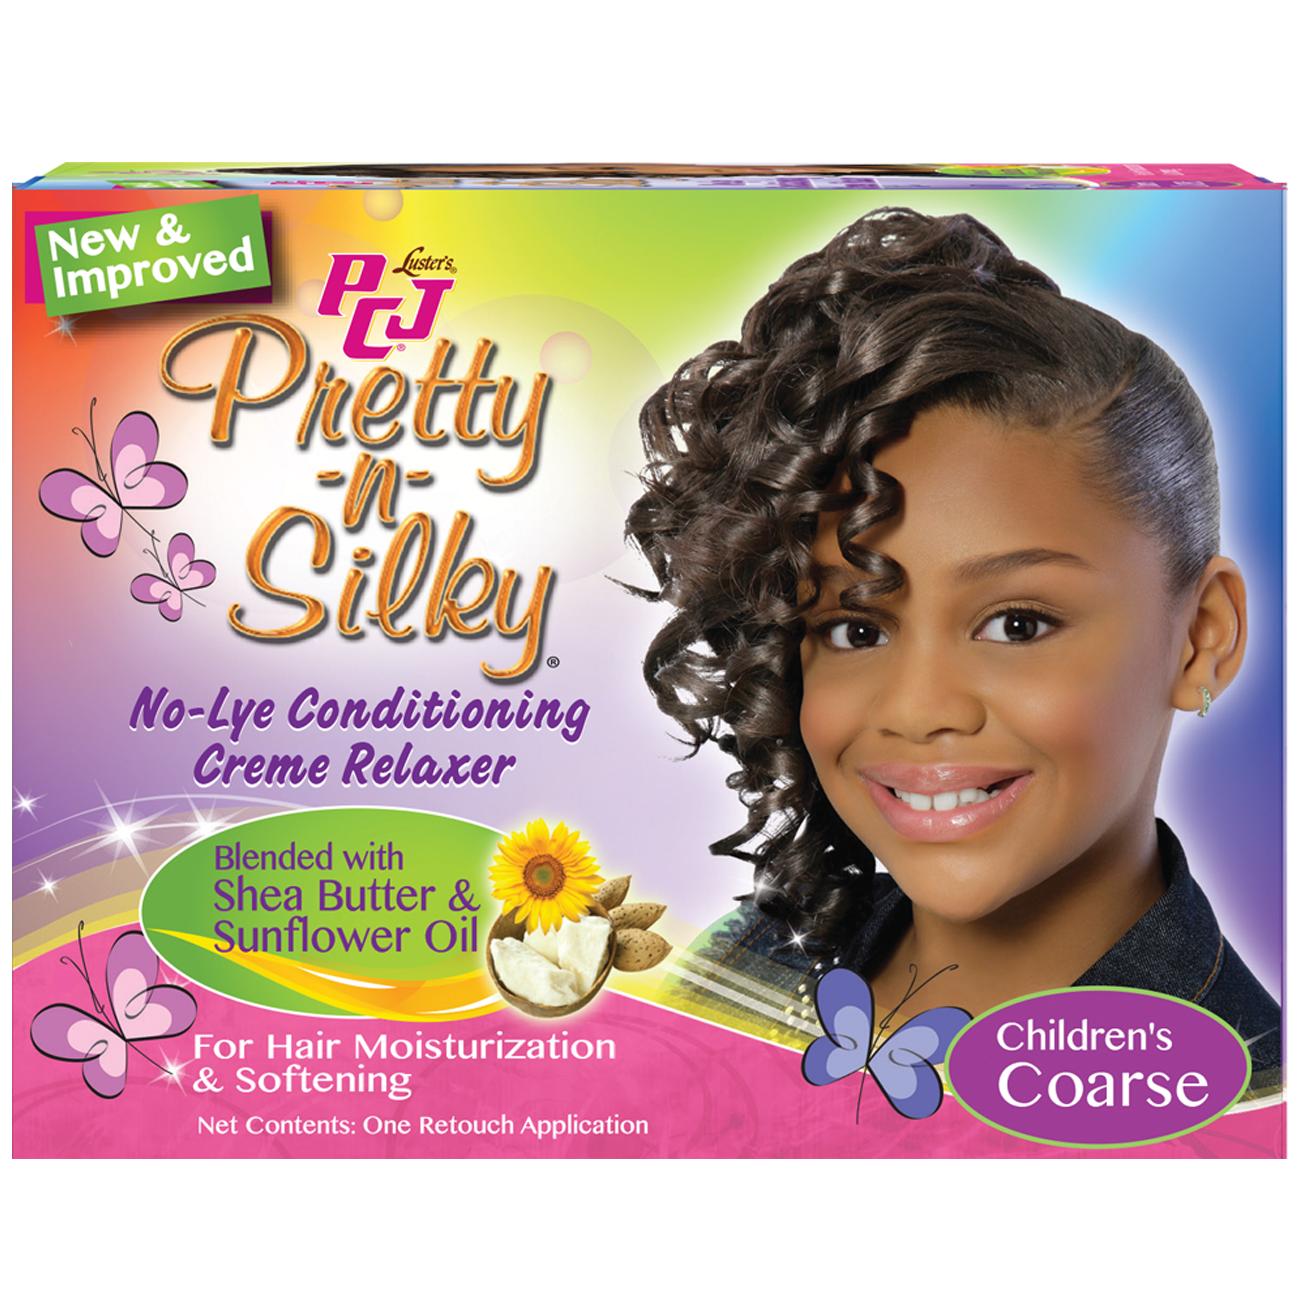 Lusters Pcj Pretty-N-Silky No-Lye Conditioning Creme Relaxer Children's Coarse